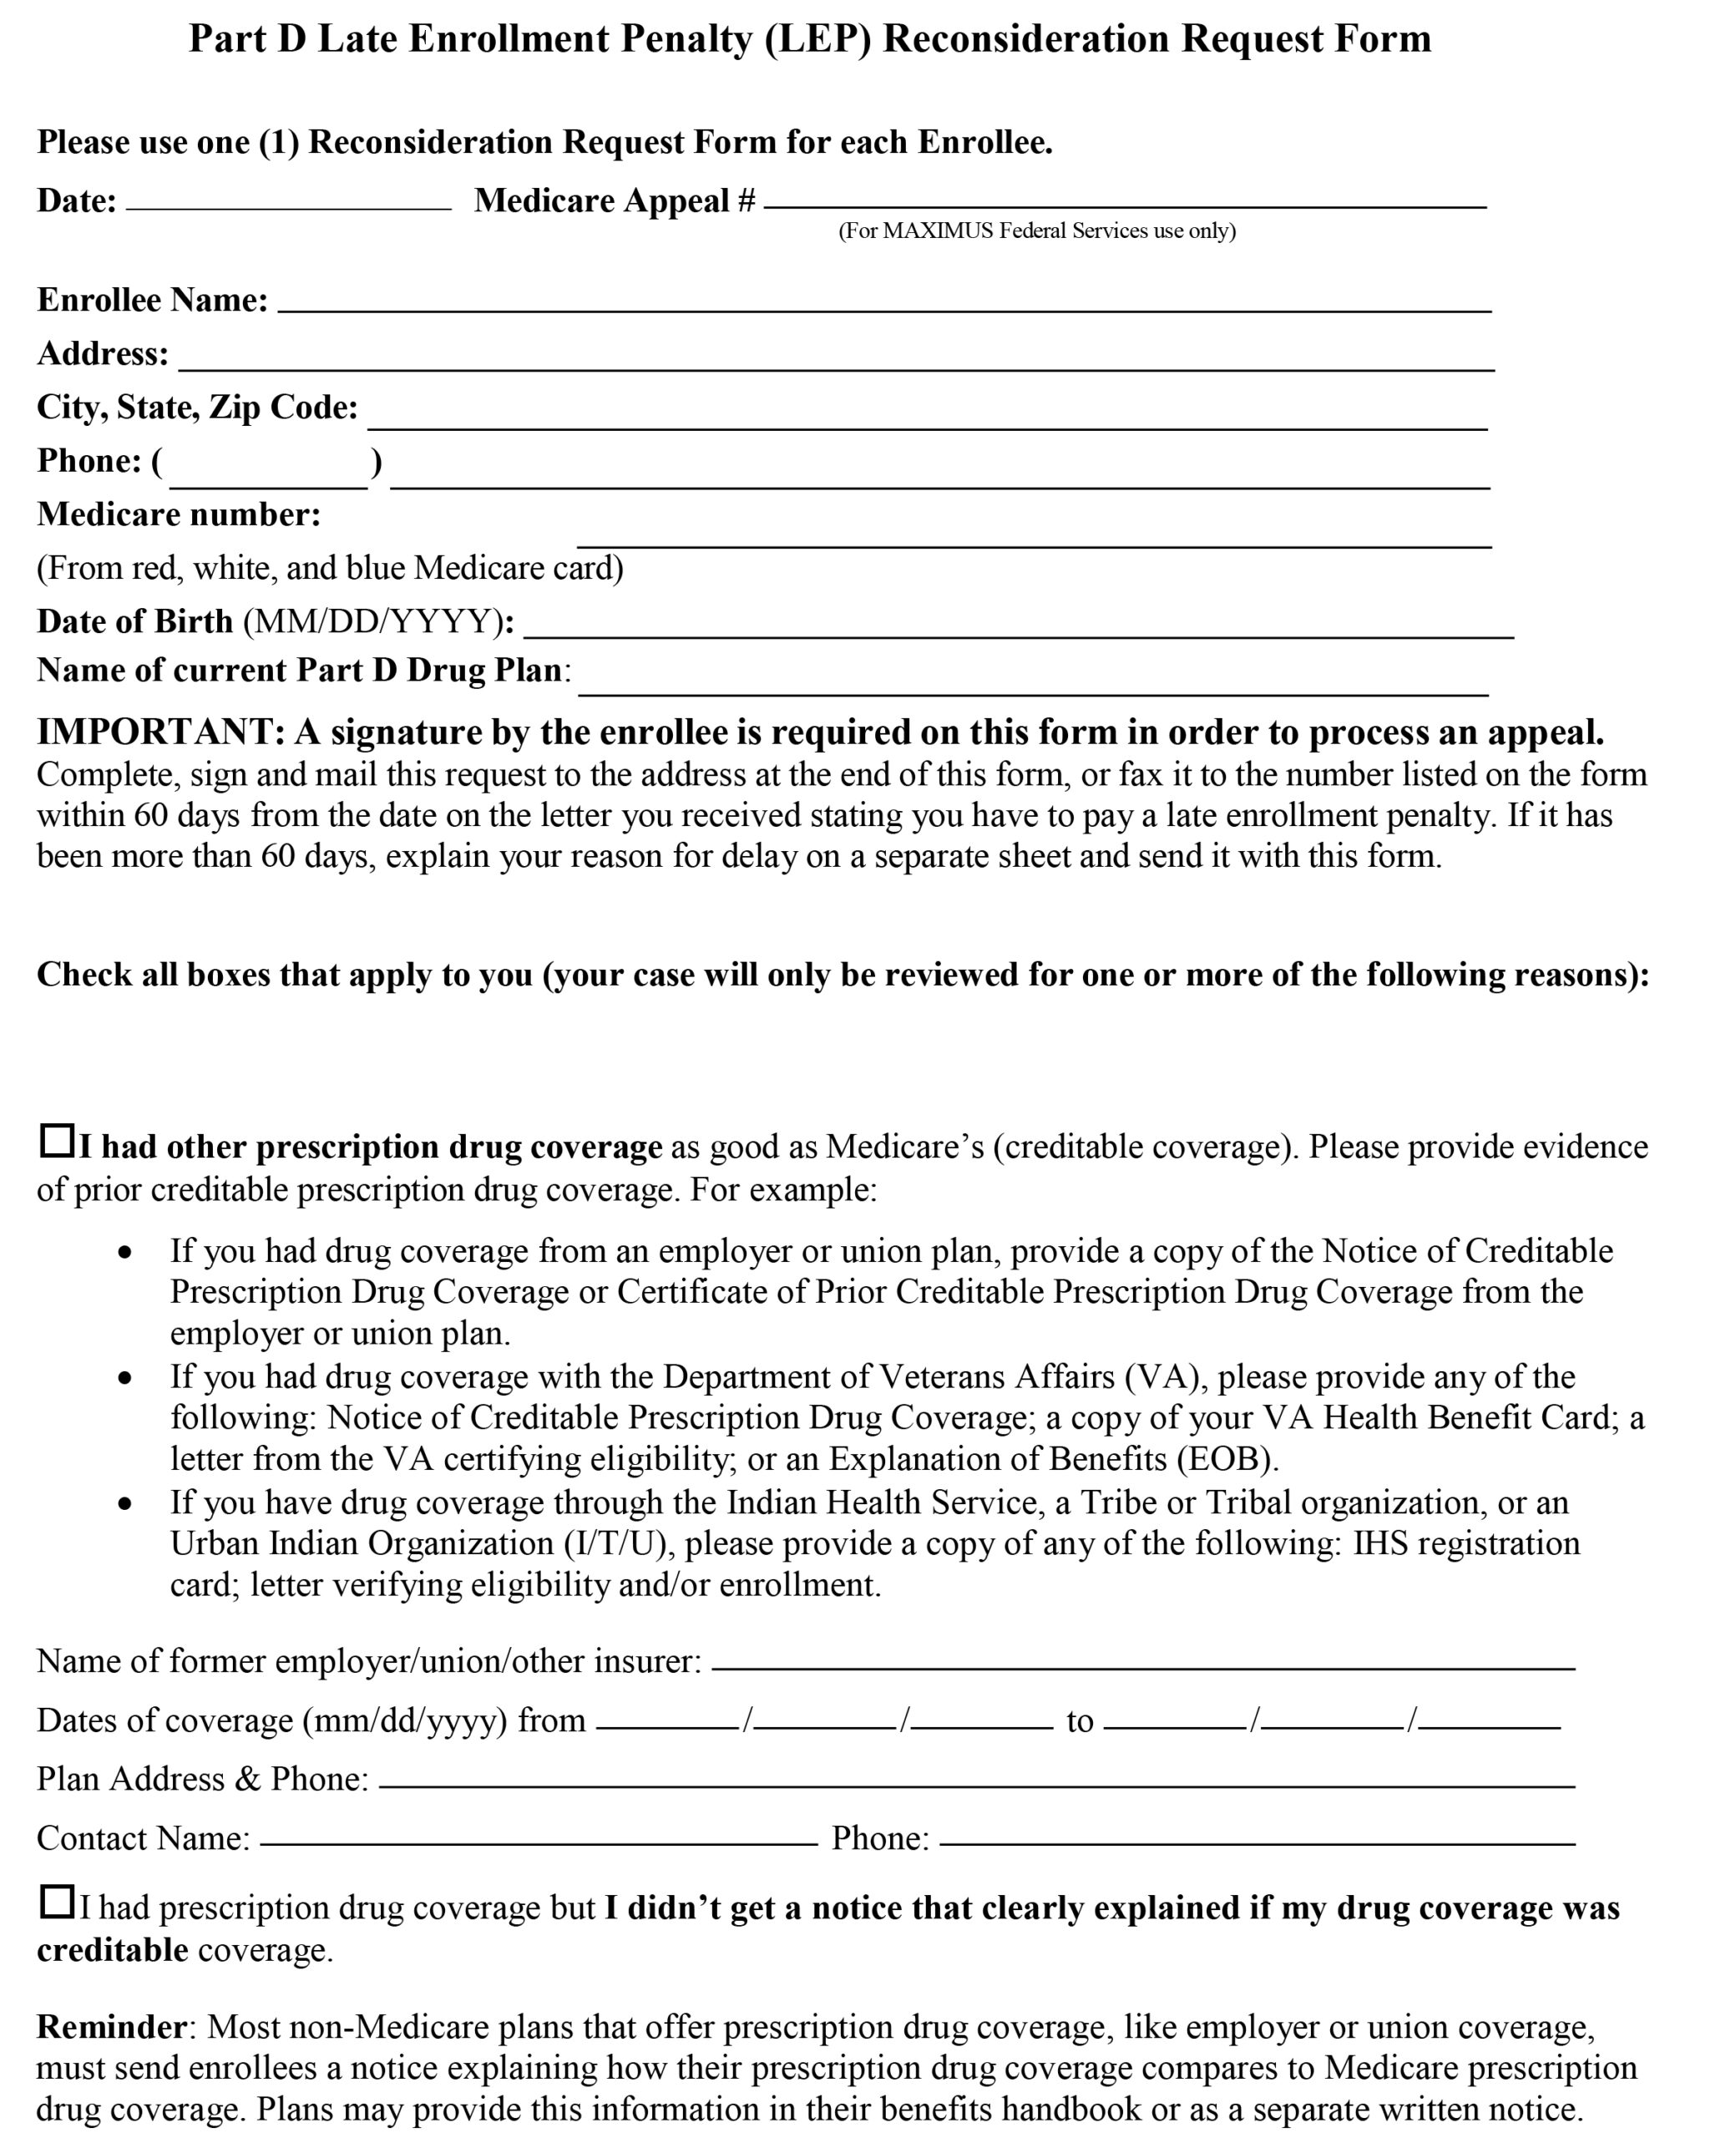 Part D Late Enrollment Penalty Reconsideration Request form